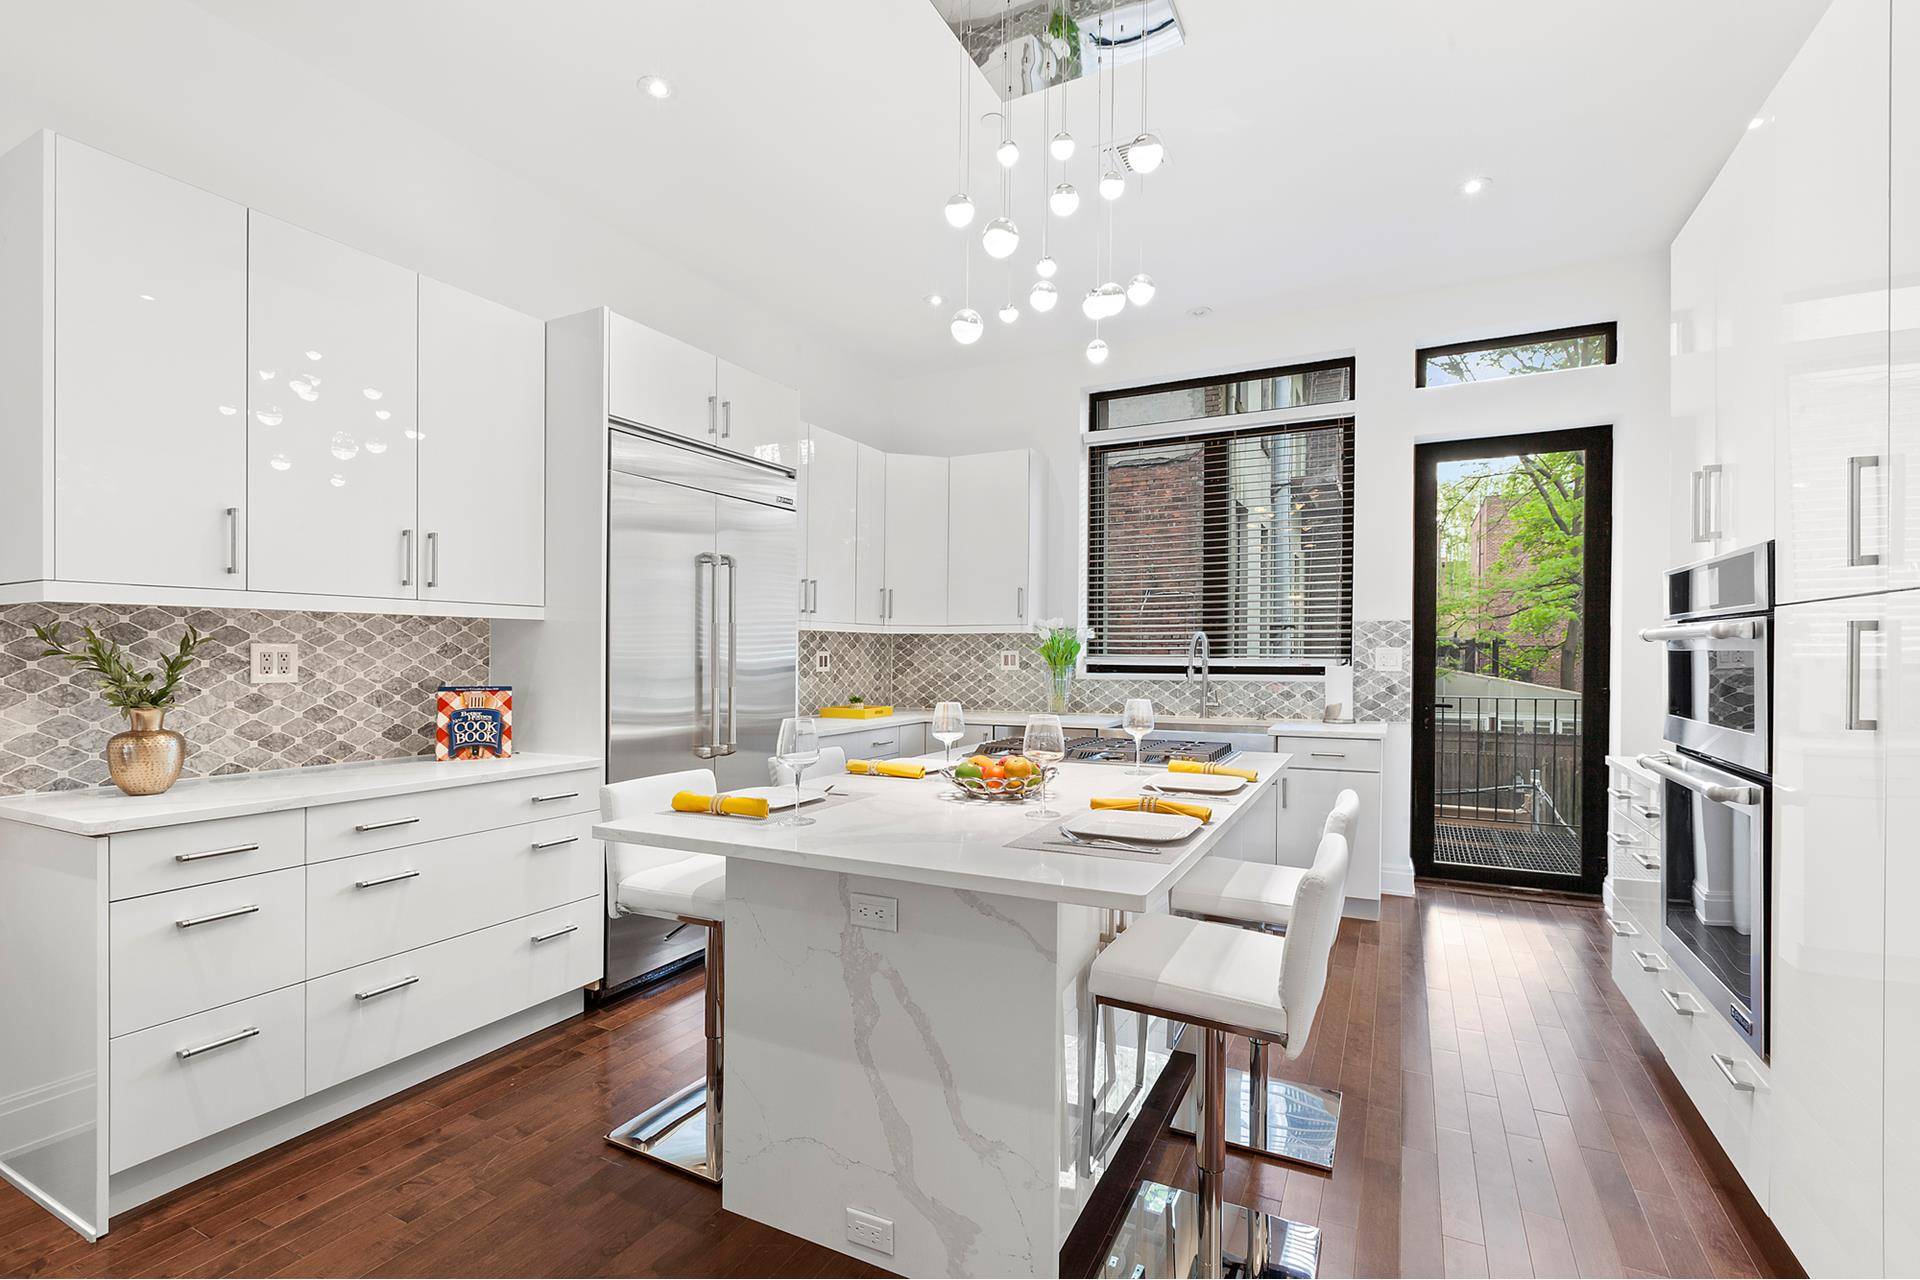 This is an auto generated Unit for BuildingRent Prestigiously located on Madison Avenue, this impeccably renovated, 2 family home offers the finest in Harlem townhouse living.